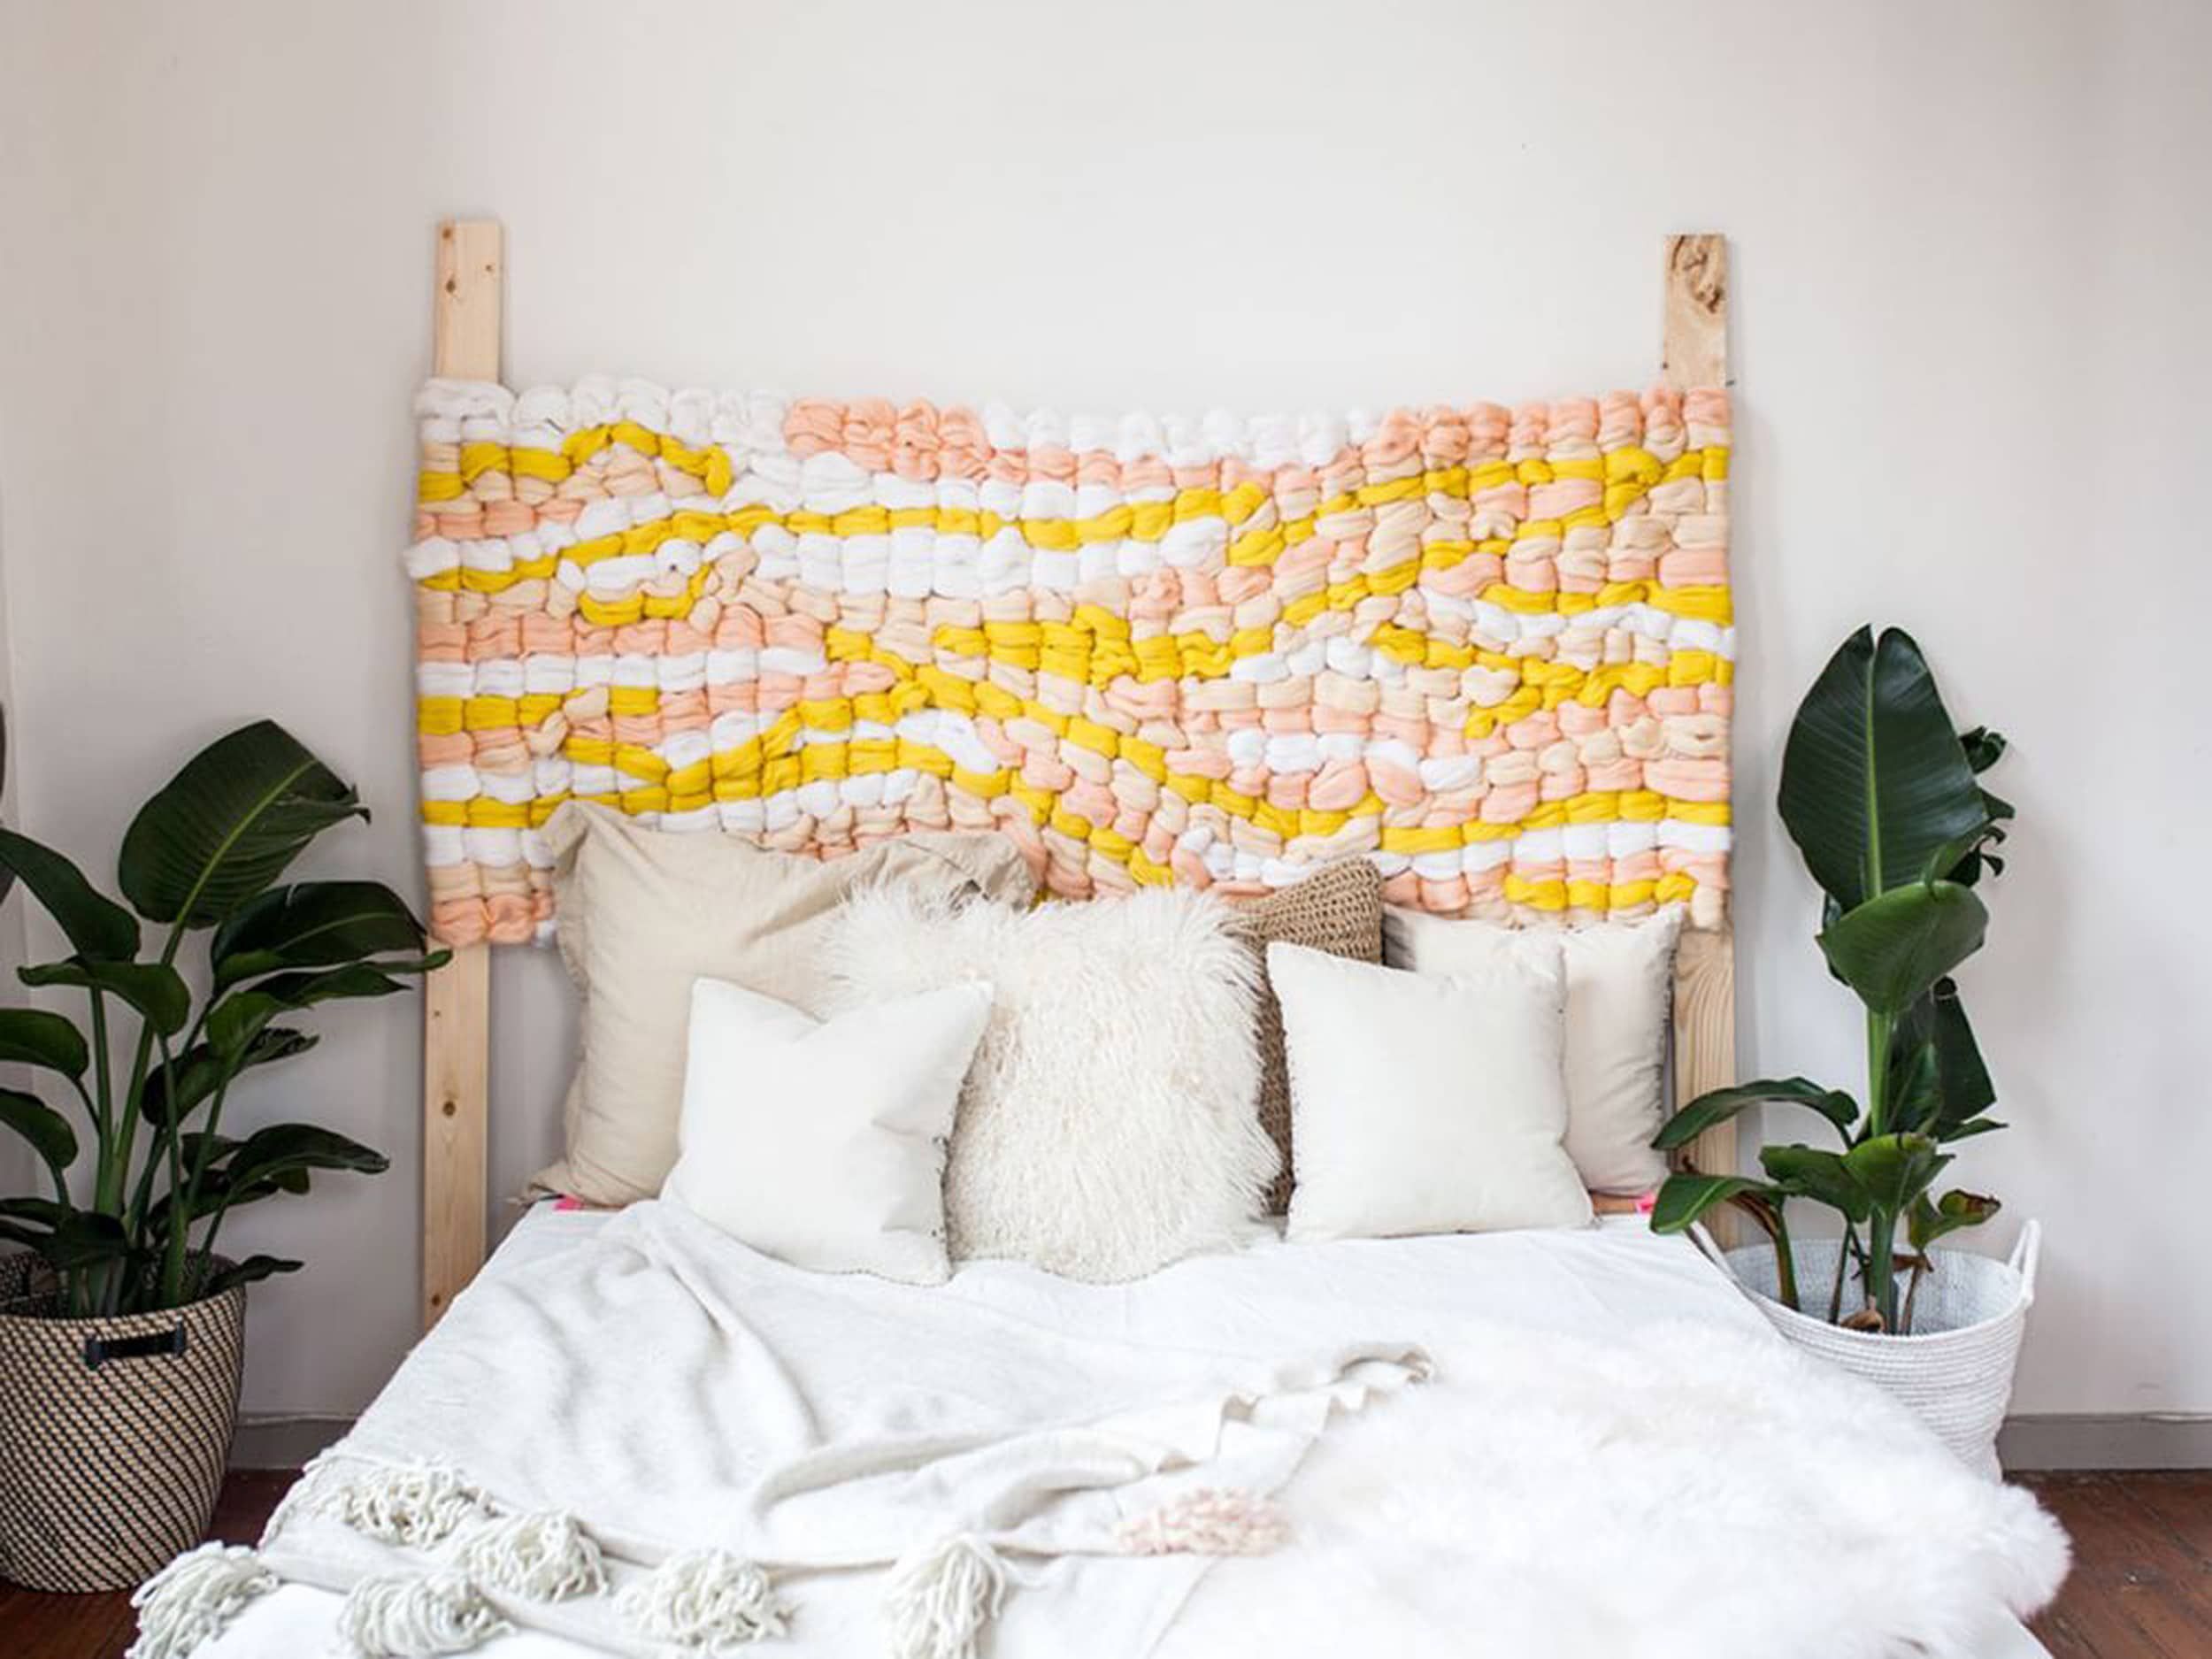 12 DIY Headboards That Everyone Will Think You Actually Bought - Emily Henderson - 12 DIY Headboards That Everyone Will Think You Actually Bought - Emily Henderson -   18 diy Headboard woven ideas